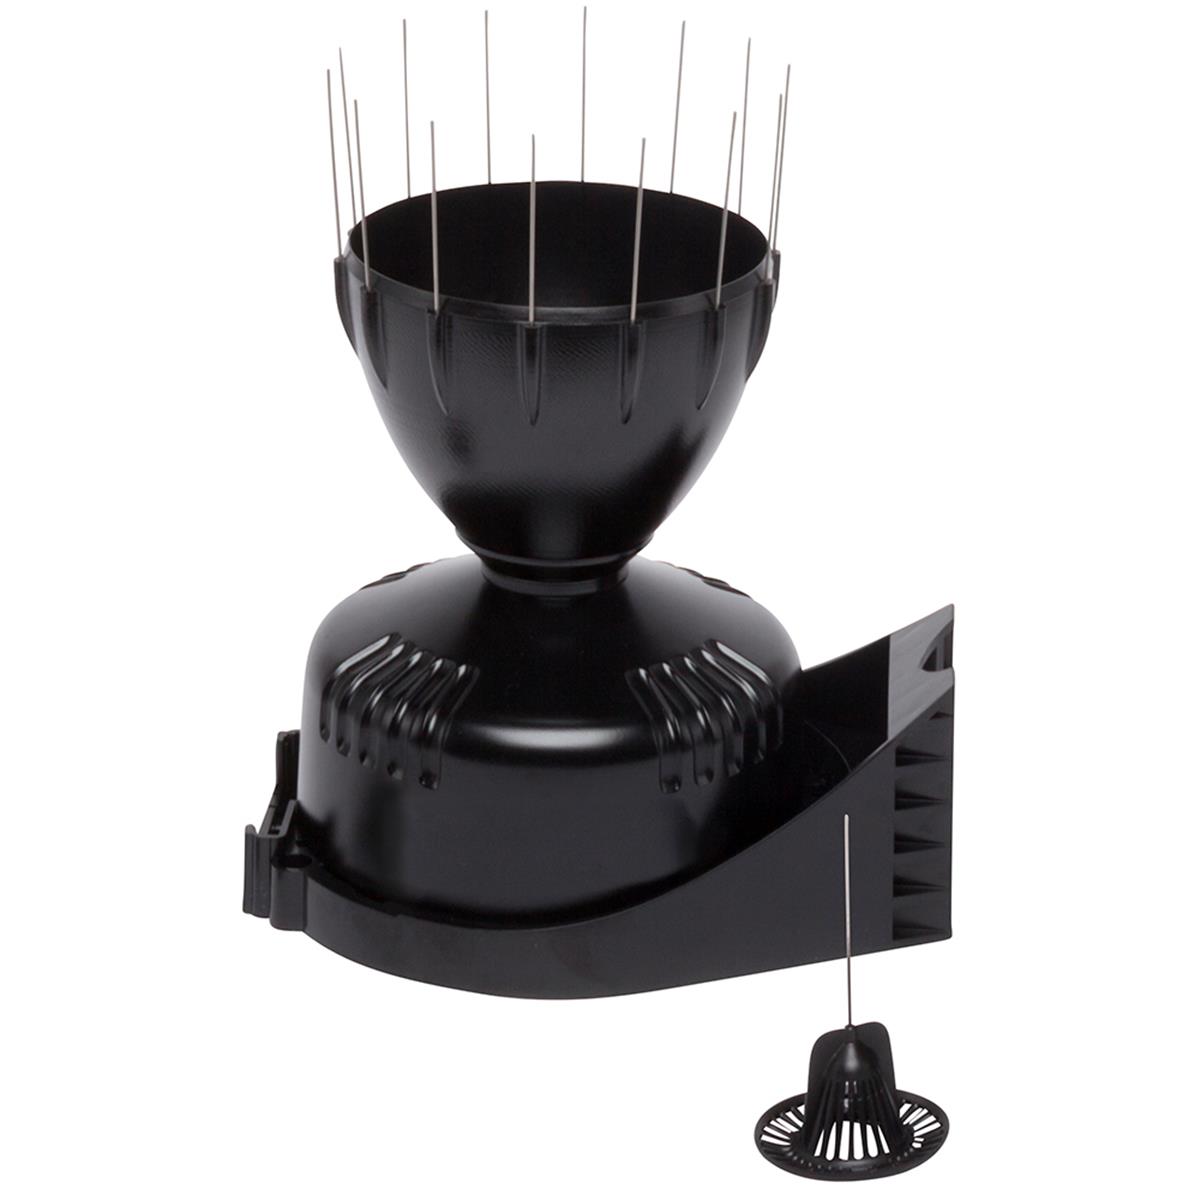 Picture of Davis Instruments 6466 AeroCone Rain Collector with Vantage Pro2 Mounting Base